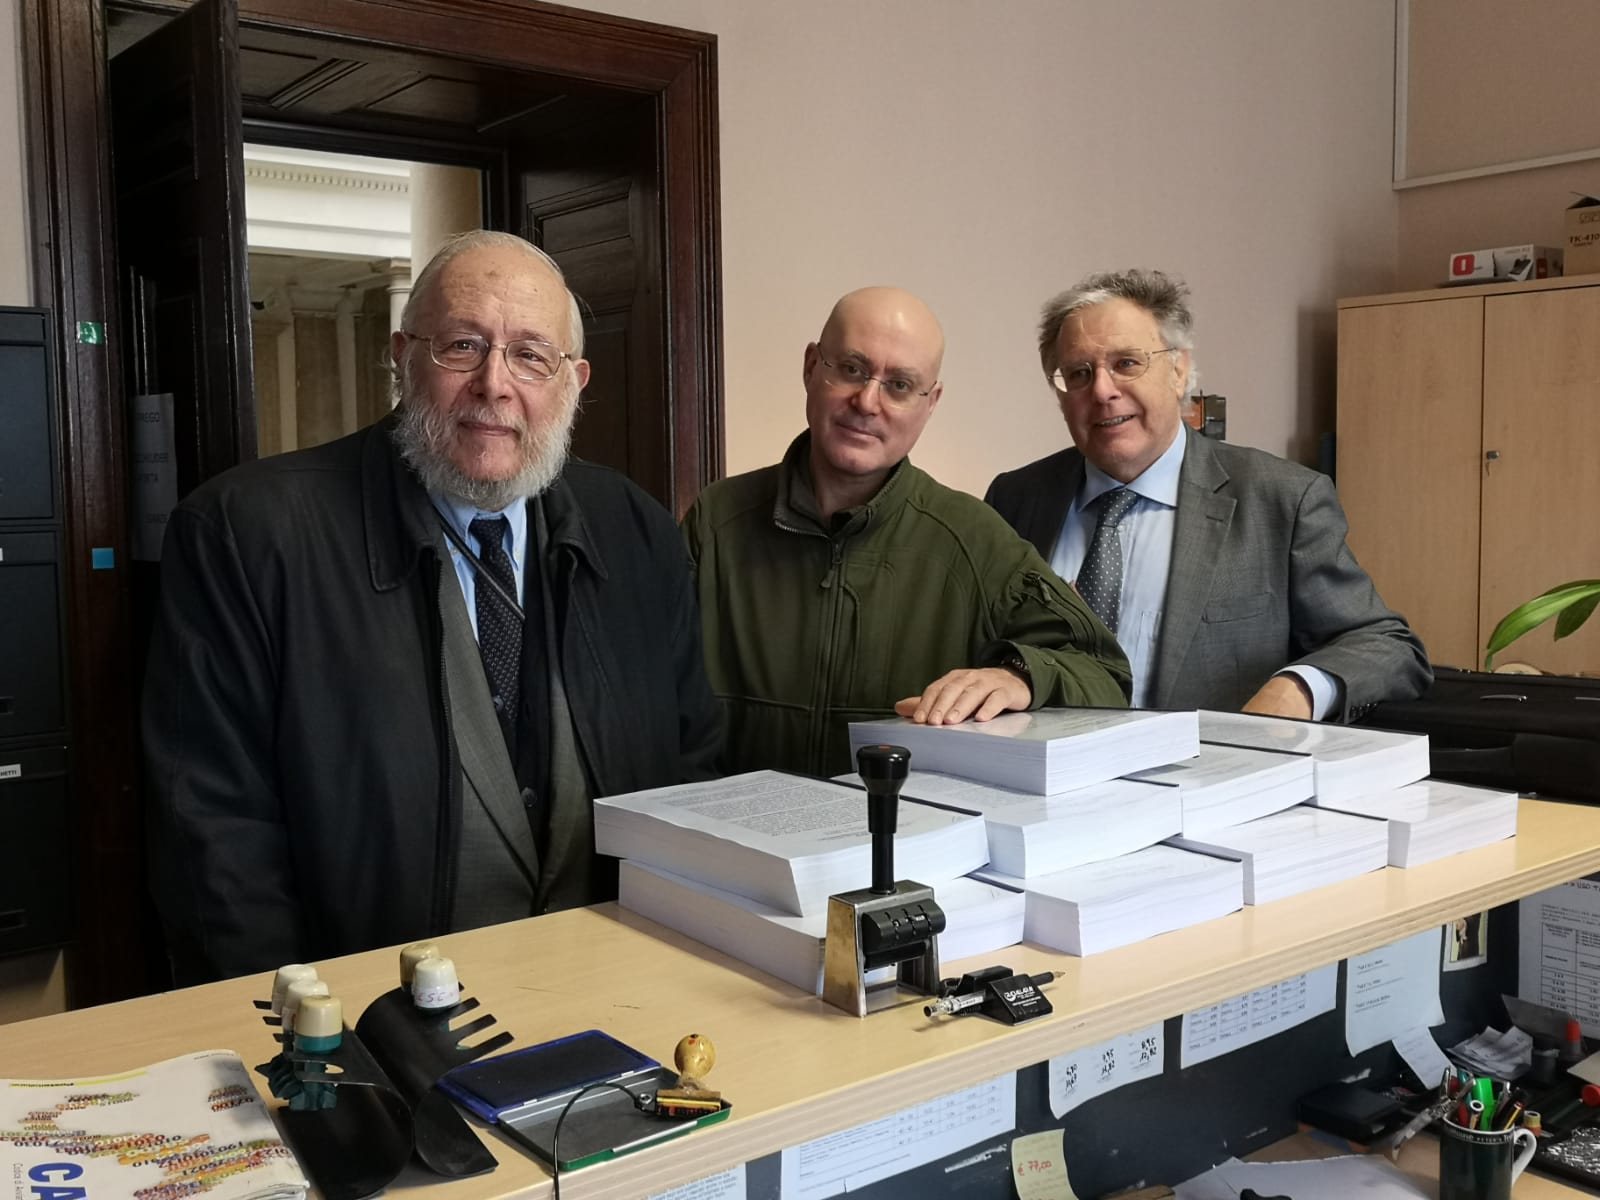 Left to right: Paolo G. Parovel (I.P.R. F.T.T.), Roberto Giurastante (Free Trieste Movement) and lawyer Dr. Walter Zidarich. [Photo: Mlach].